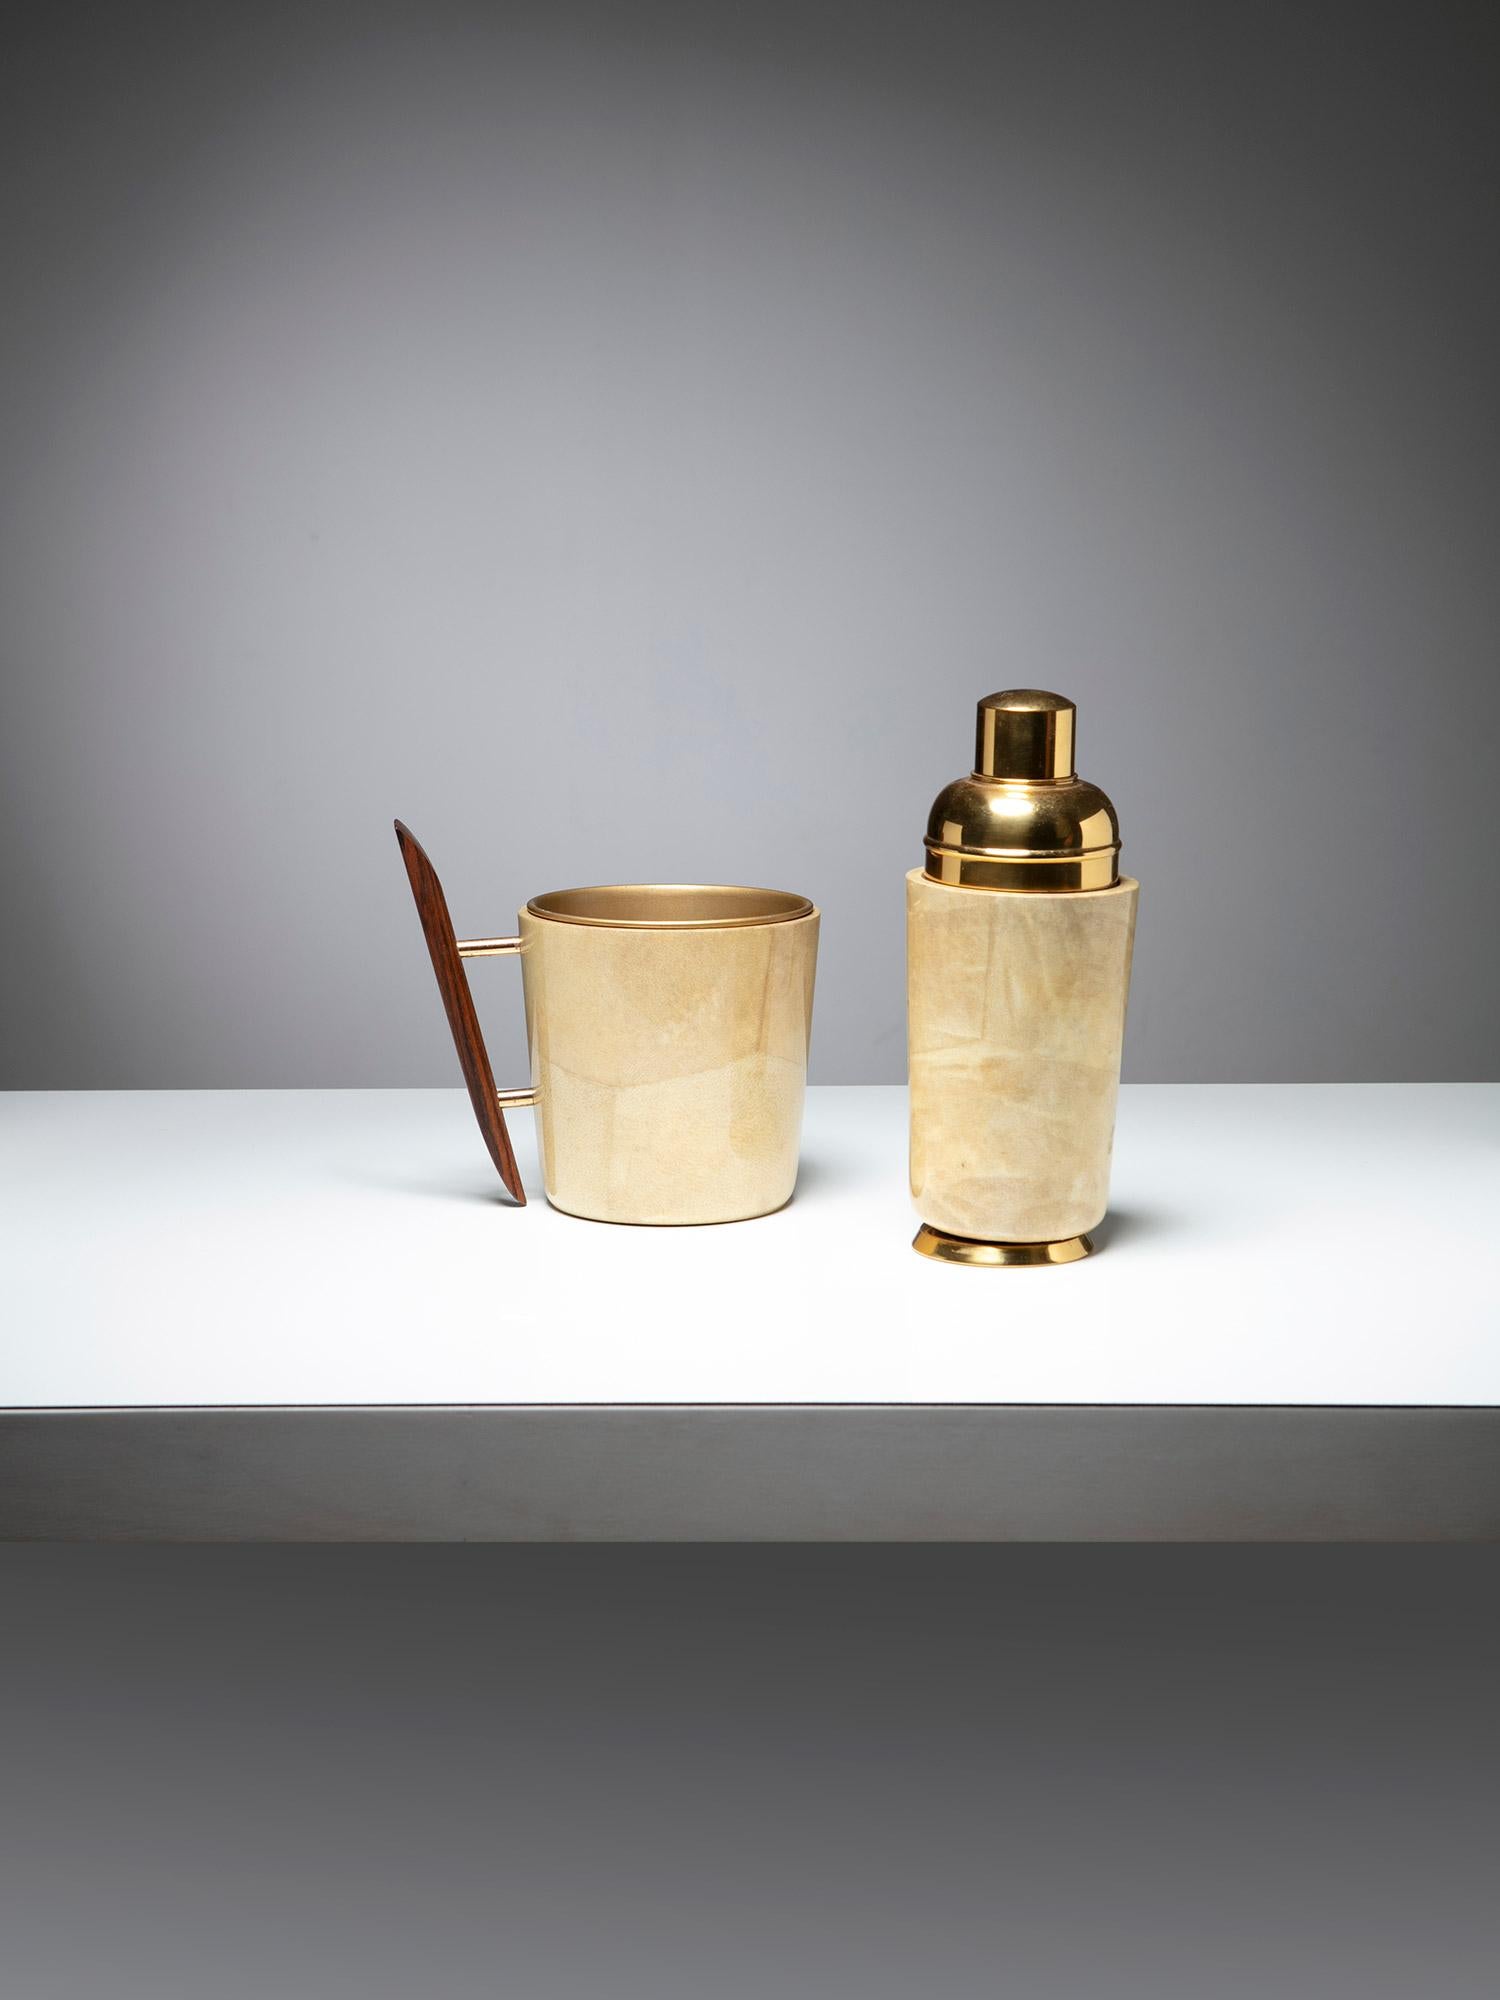 Bar set by Aldo Tura for Macabo.
Parchment cover with brass details.
Size refers to the ice bucket.